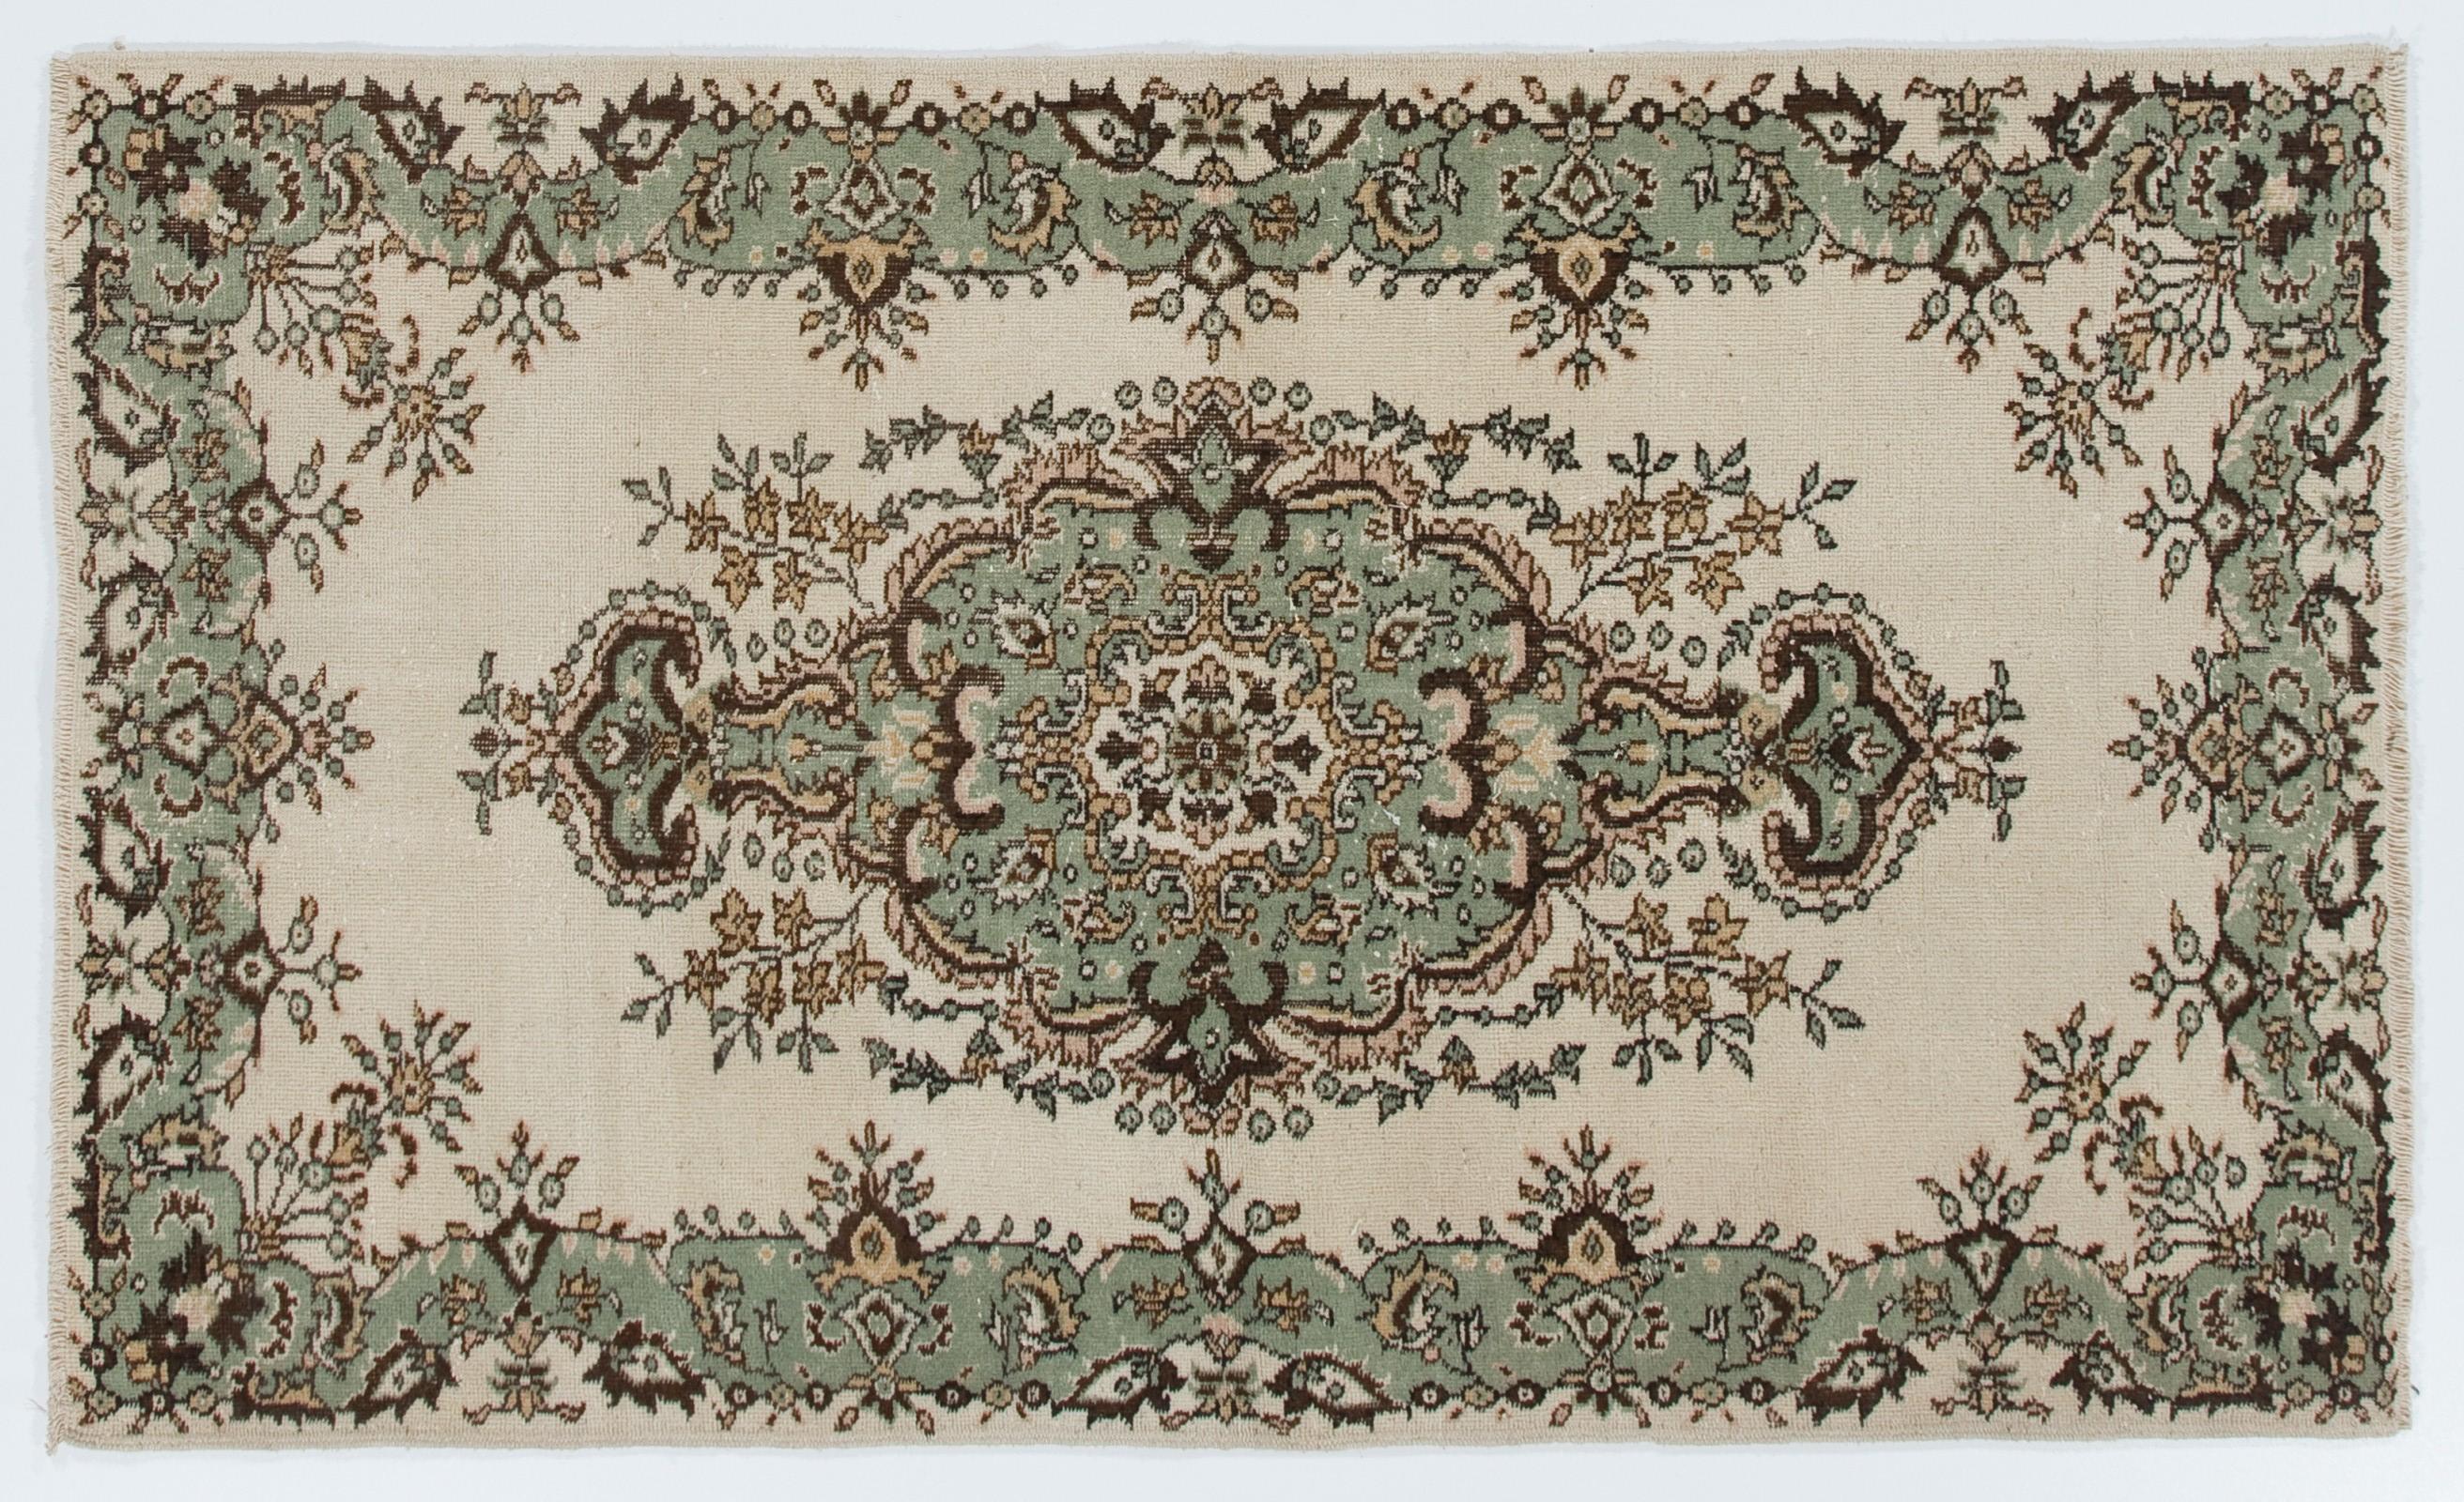 Hand-Knotted 4.2x7 Ft Vintage Medallion Design Handmade Rug in Beige, Green and Brown Colors For Sale